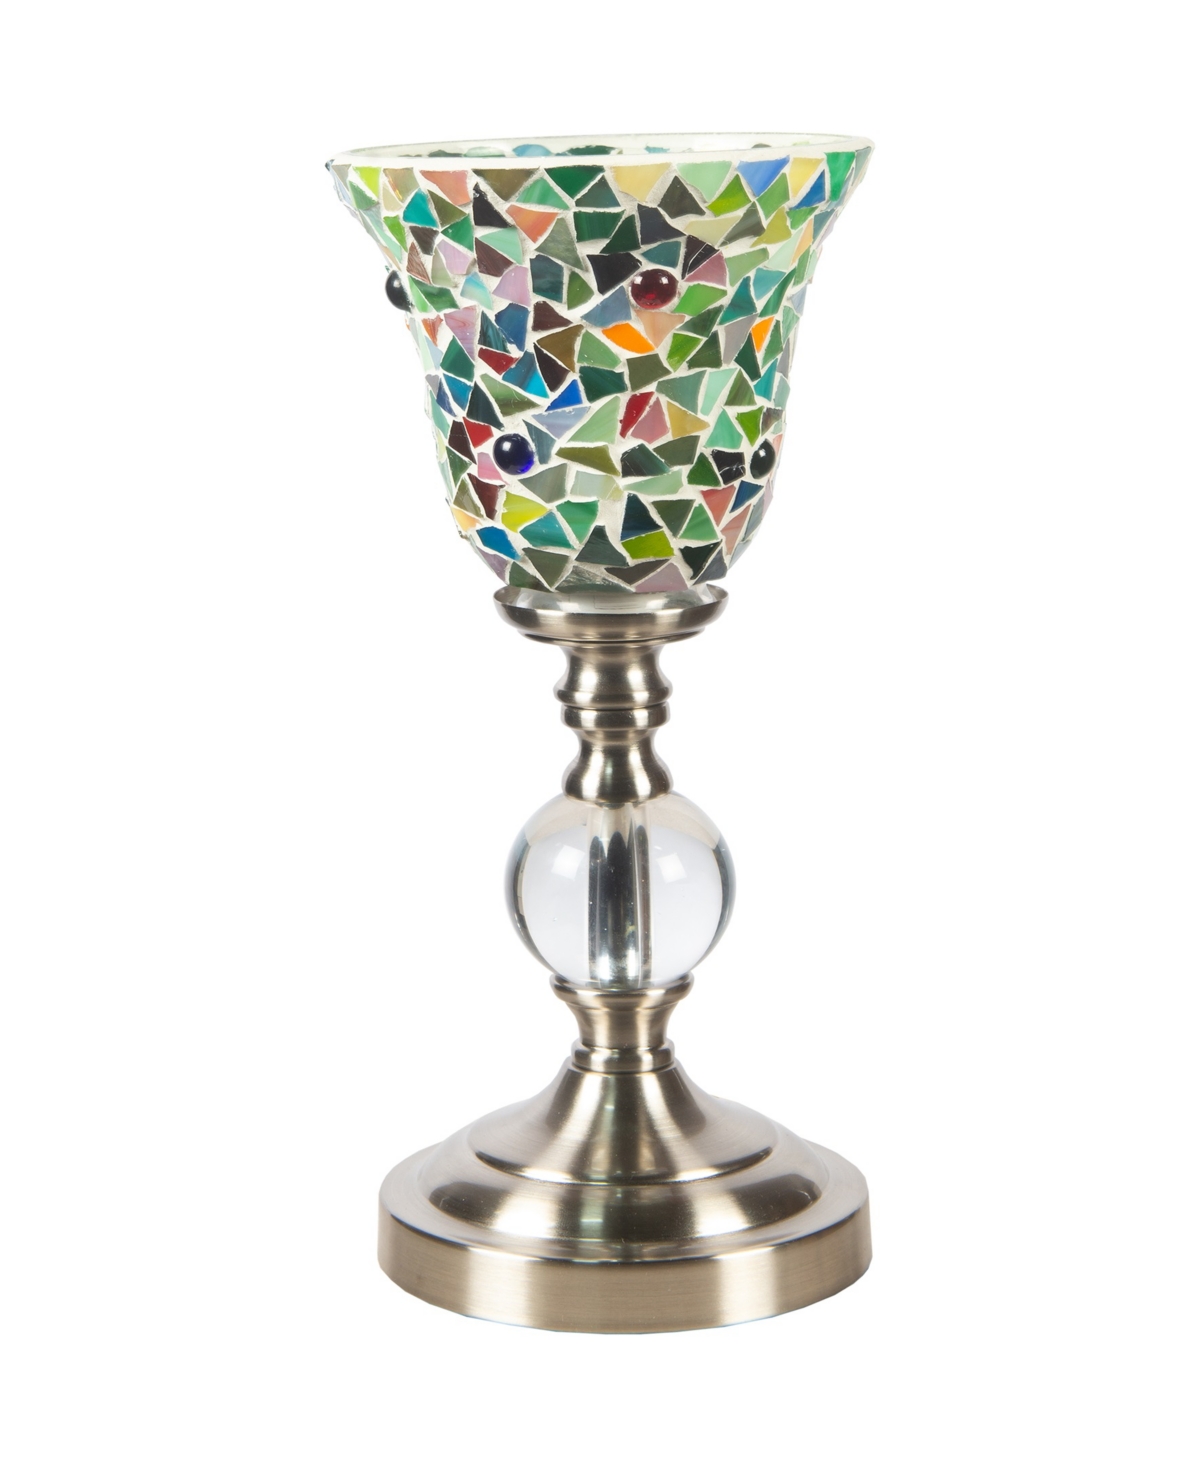 Shop Dale Tiffany 12.5" Tall Lucida Mosaic Handcrafted Art Glass Shade With Jewels Accent Lamp In Multi-color